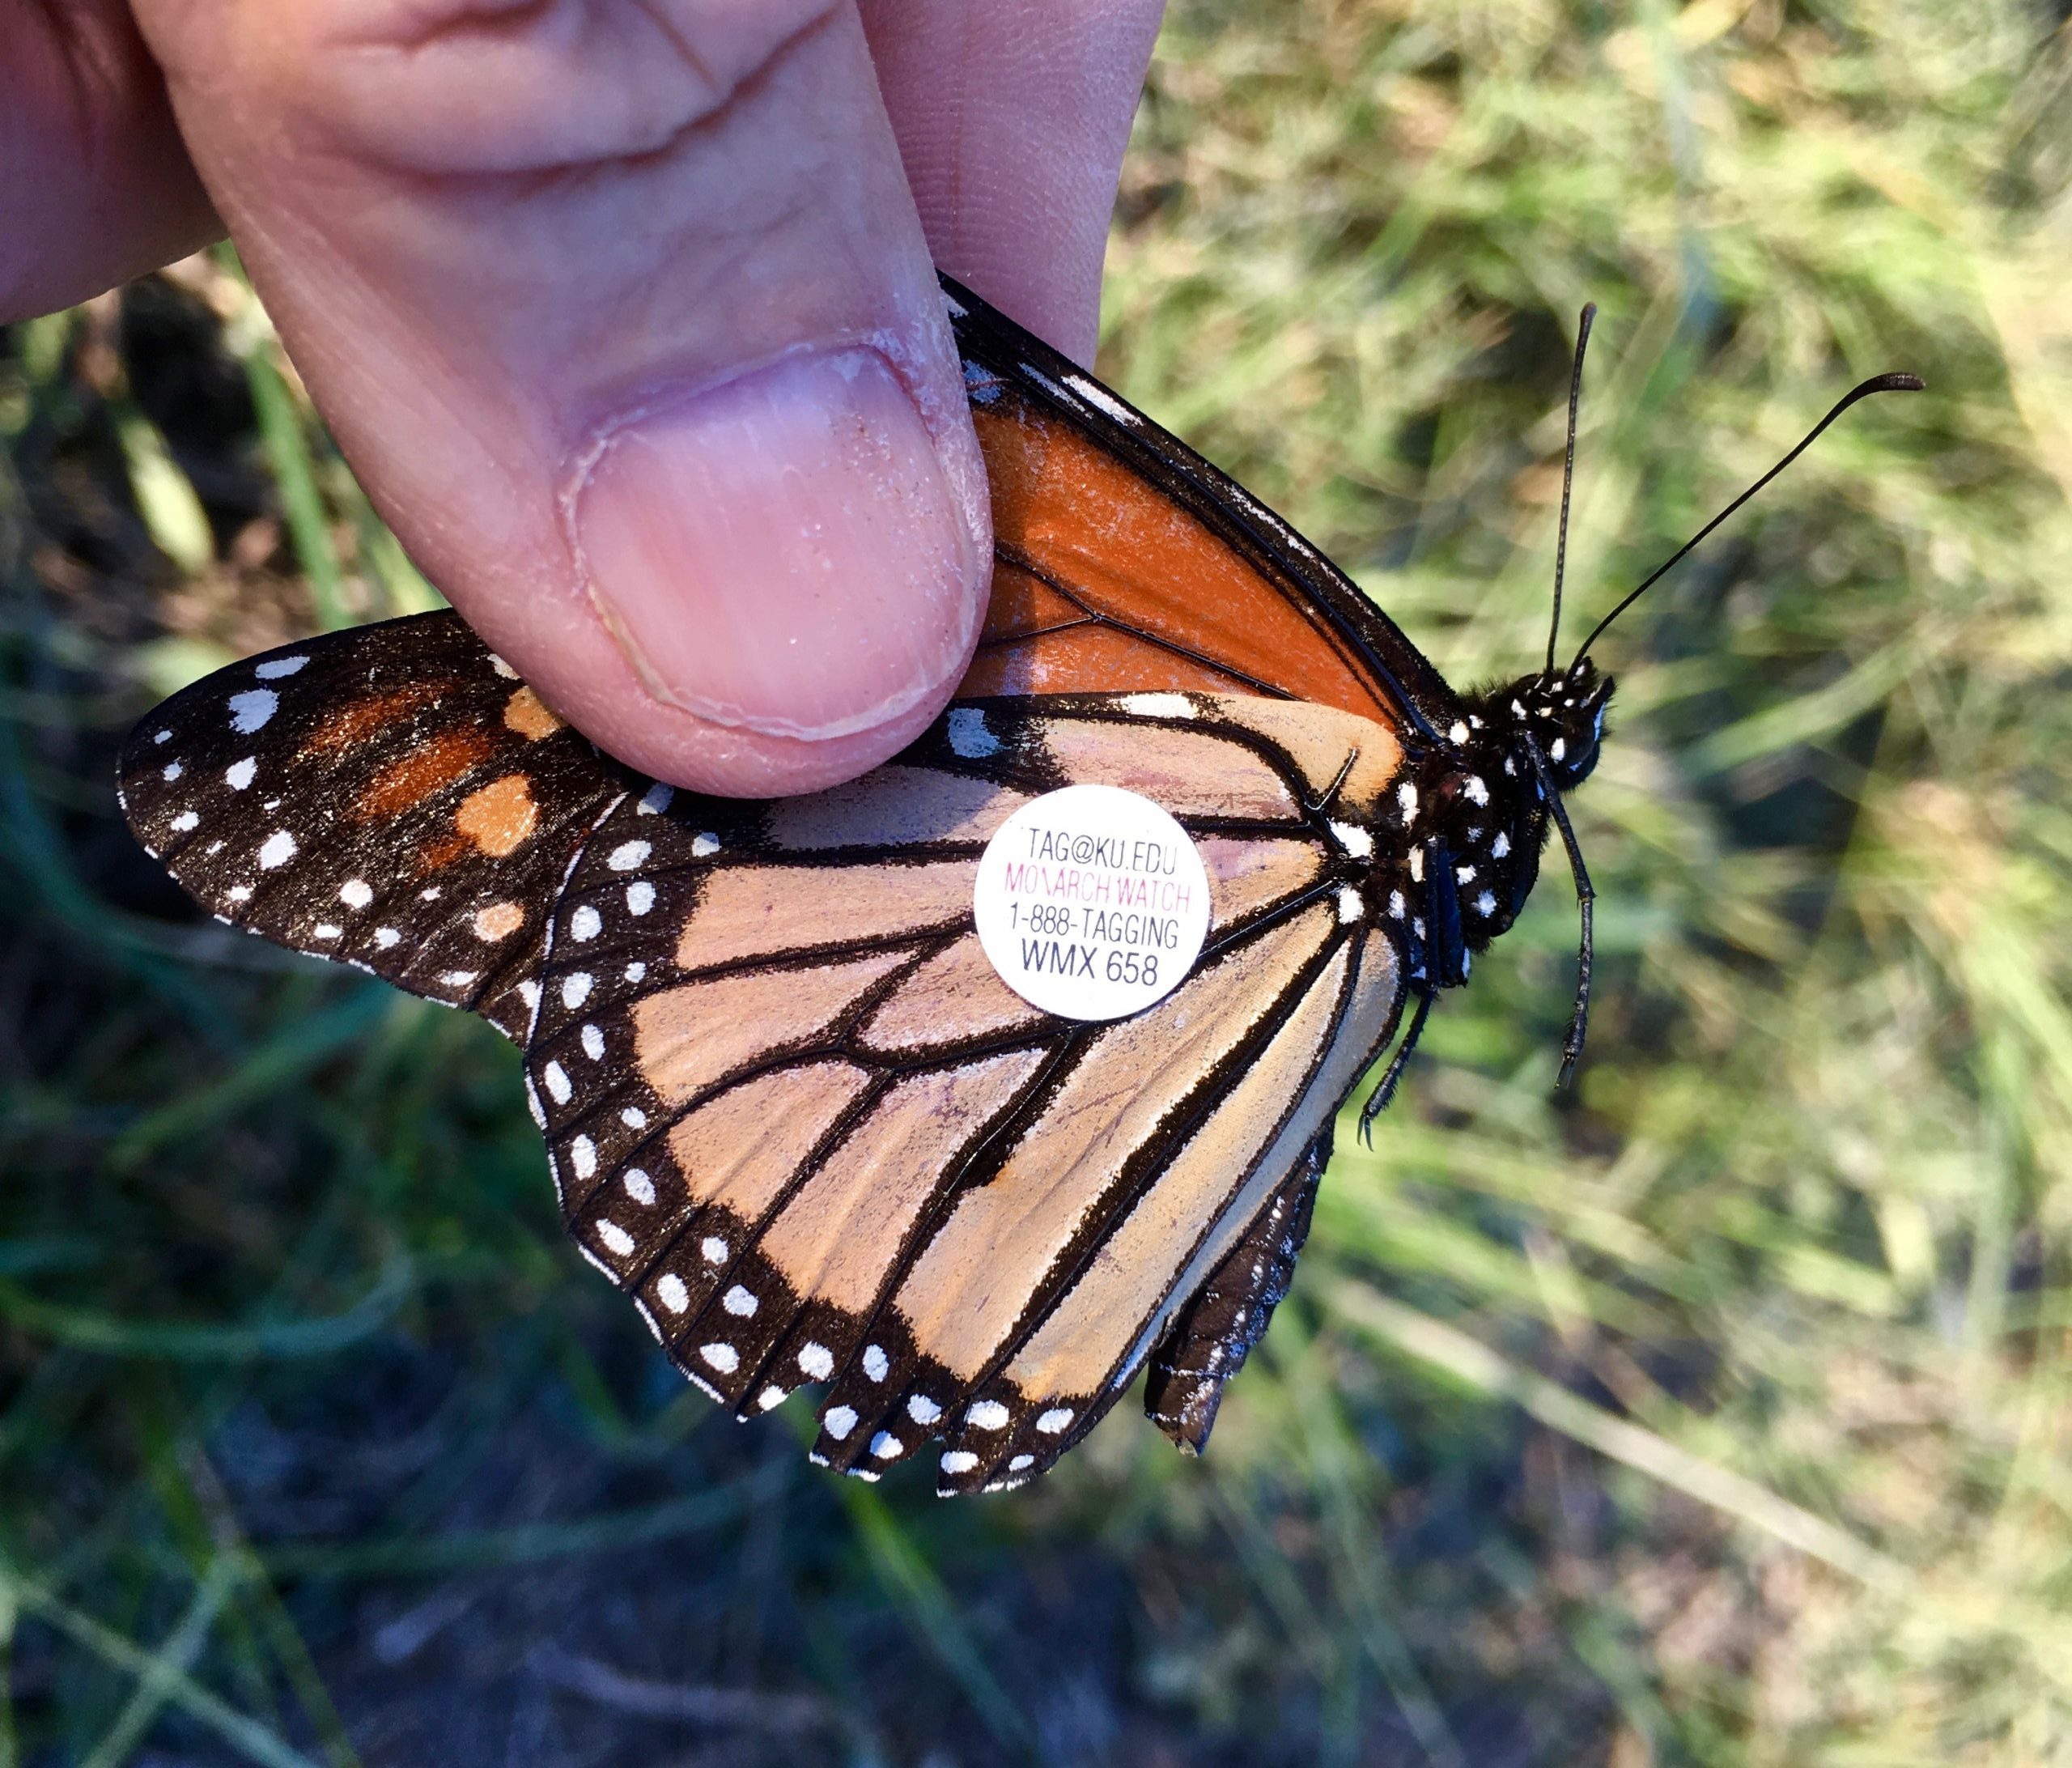 tagged recovered Monarch